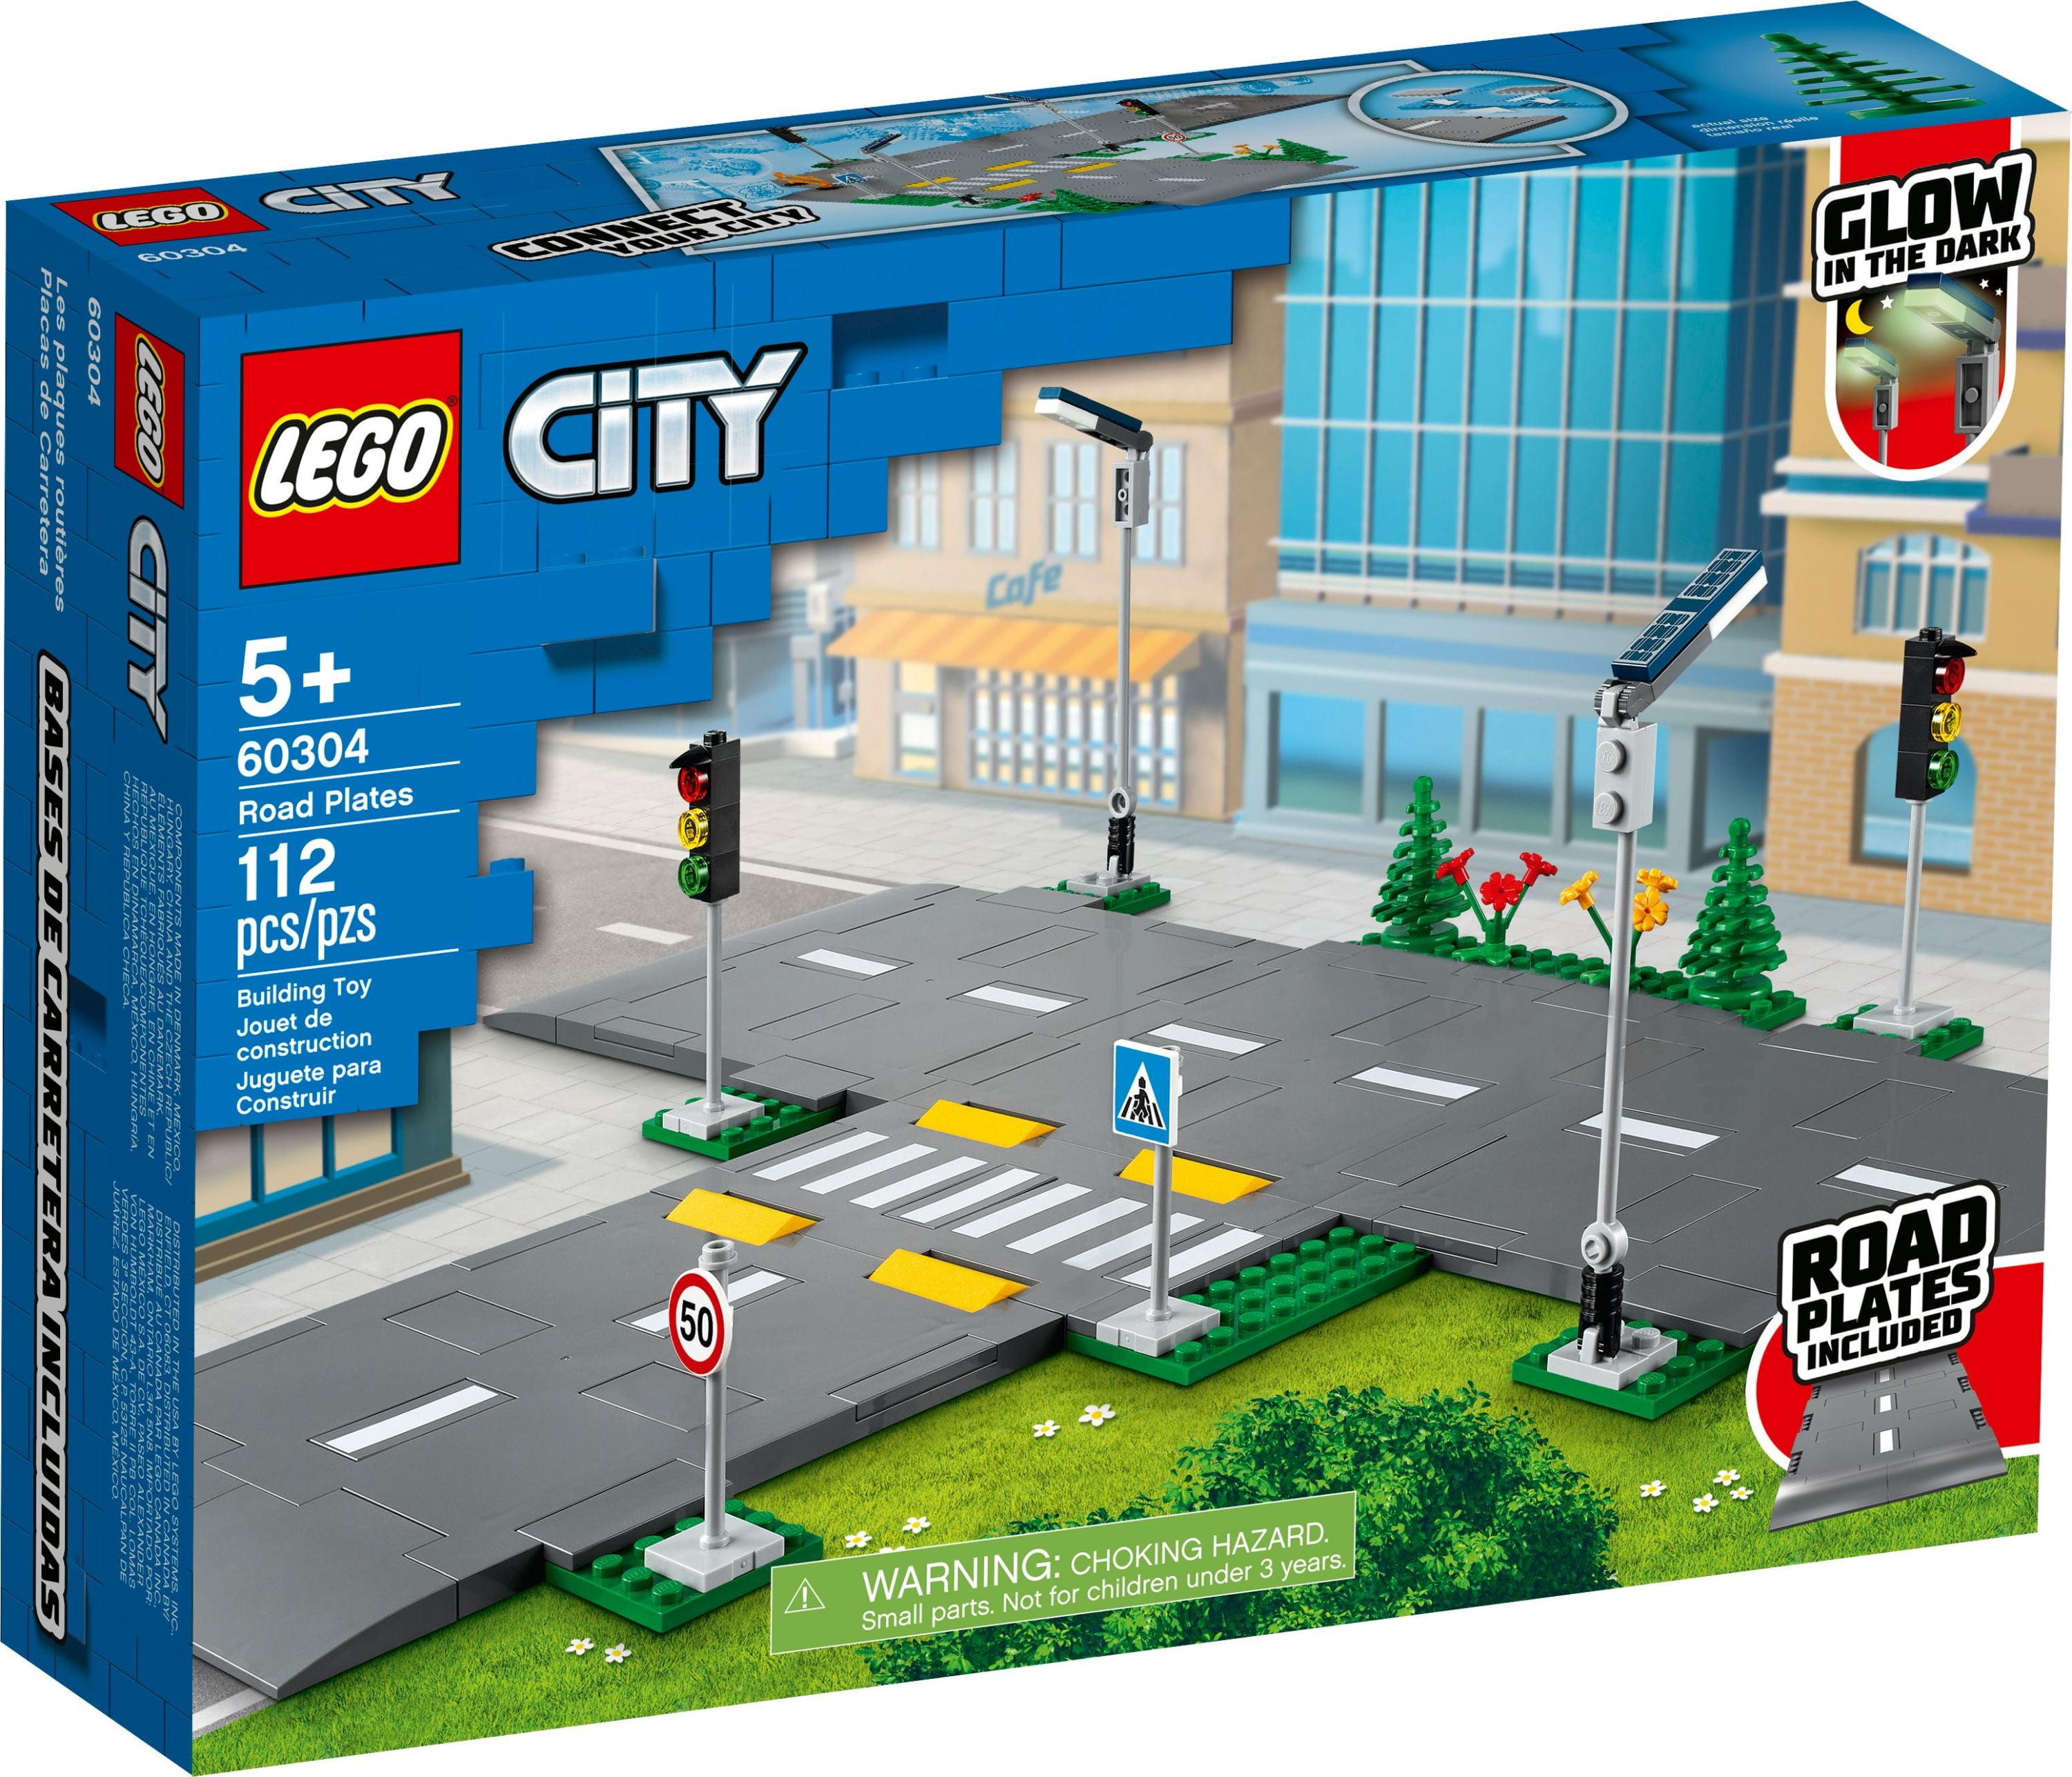 LEGO Road Plates Building Set, 60304 with Traffic Lights, Trees & Glow in the Dark Bricks, Gifts for 5 Plus Year Old Kids, Boys & Girls - Walmart.com